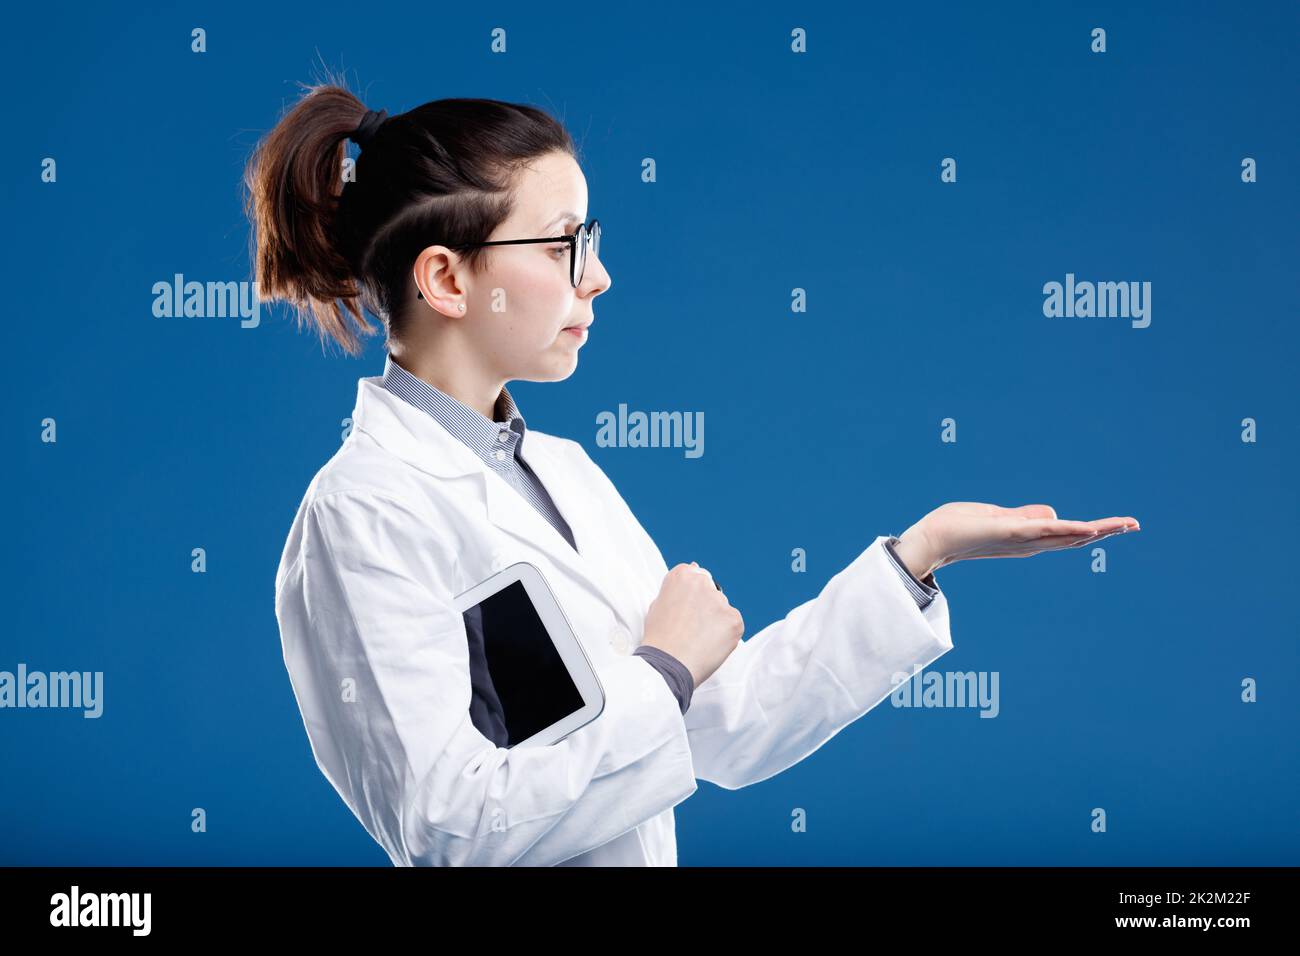 researcher or doctor showing an invisible object Stock Photo